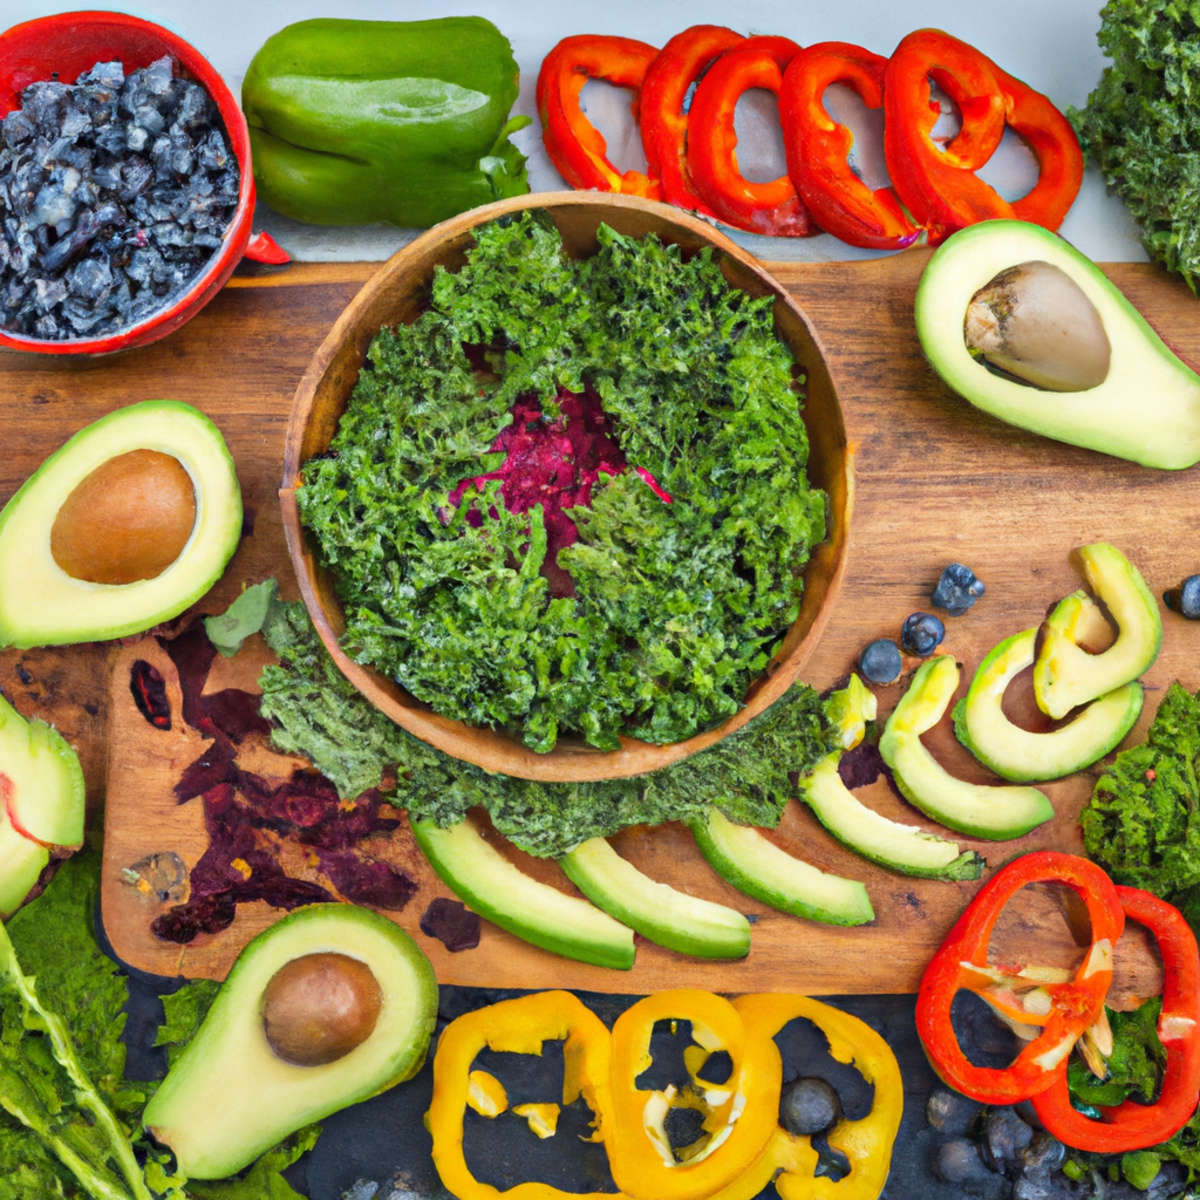 The photo captures a colorful array of superfoods arranged on a wooden cutting board. In the center, a ripe avocado is sliced open, revealing its creamy green flesh. Surrounding it are vibrant red and yellow bell peppers, sliced into thin strips, and a handful of bright green kale leaves. A small bowl of antioxidant-rich blueberries sits off to the side, while a sprinkle of chia seeds adds a crunchy texture to the mix. The photo exudes health and vitality, inviting the reader to explore the benefits of incorporating these superfoods into their diet.